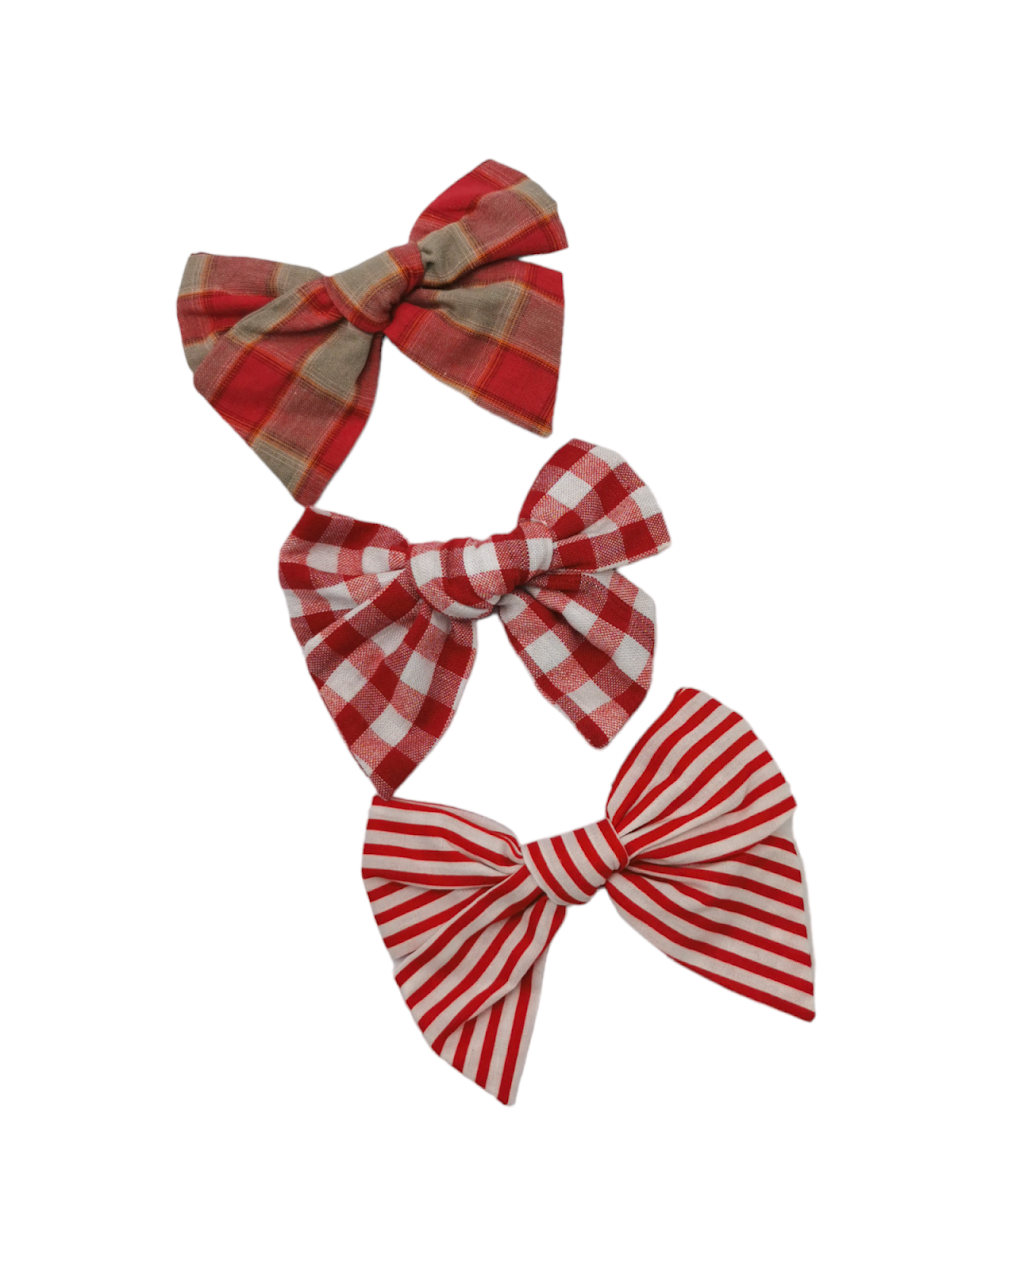 Pack of 3 - 4 inch Bow Clips - Betty Brown Boutique Ltd